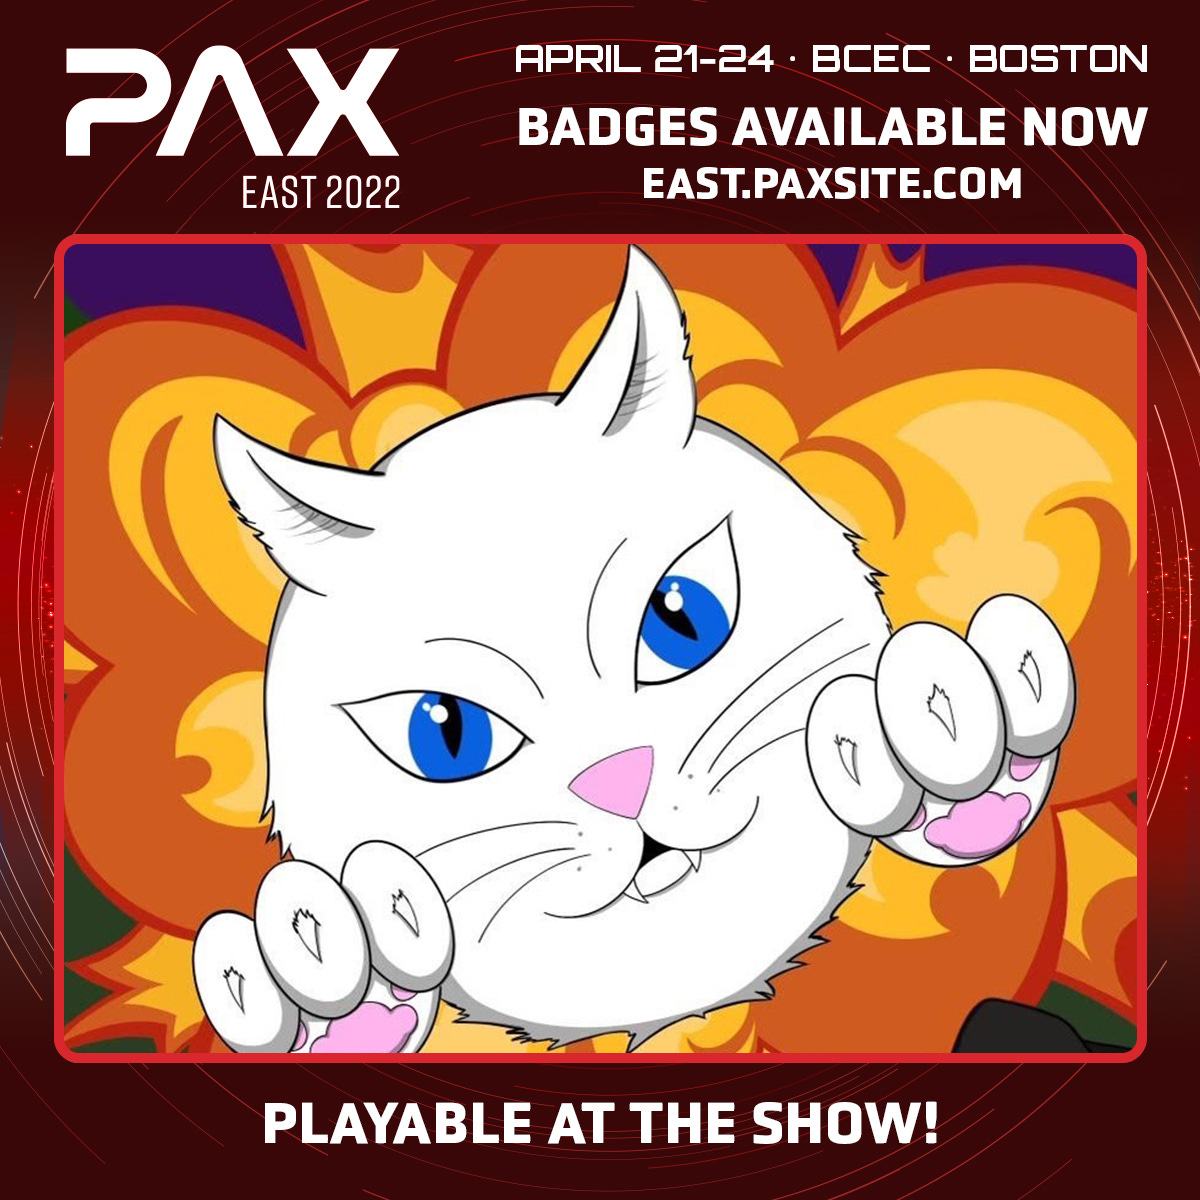 PAX East 2022
Cat Crash Playable at the show!